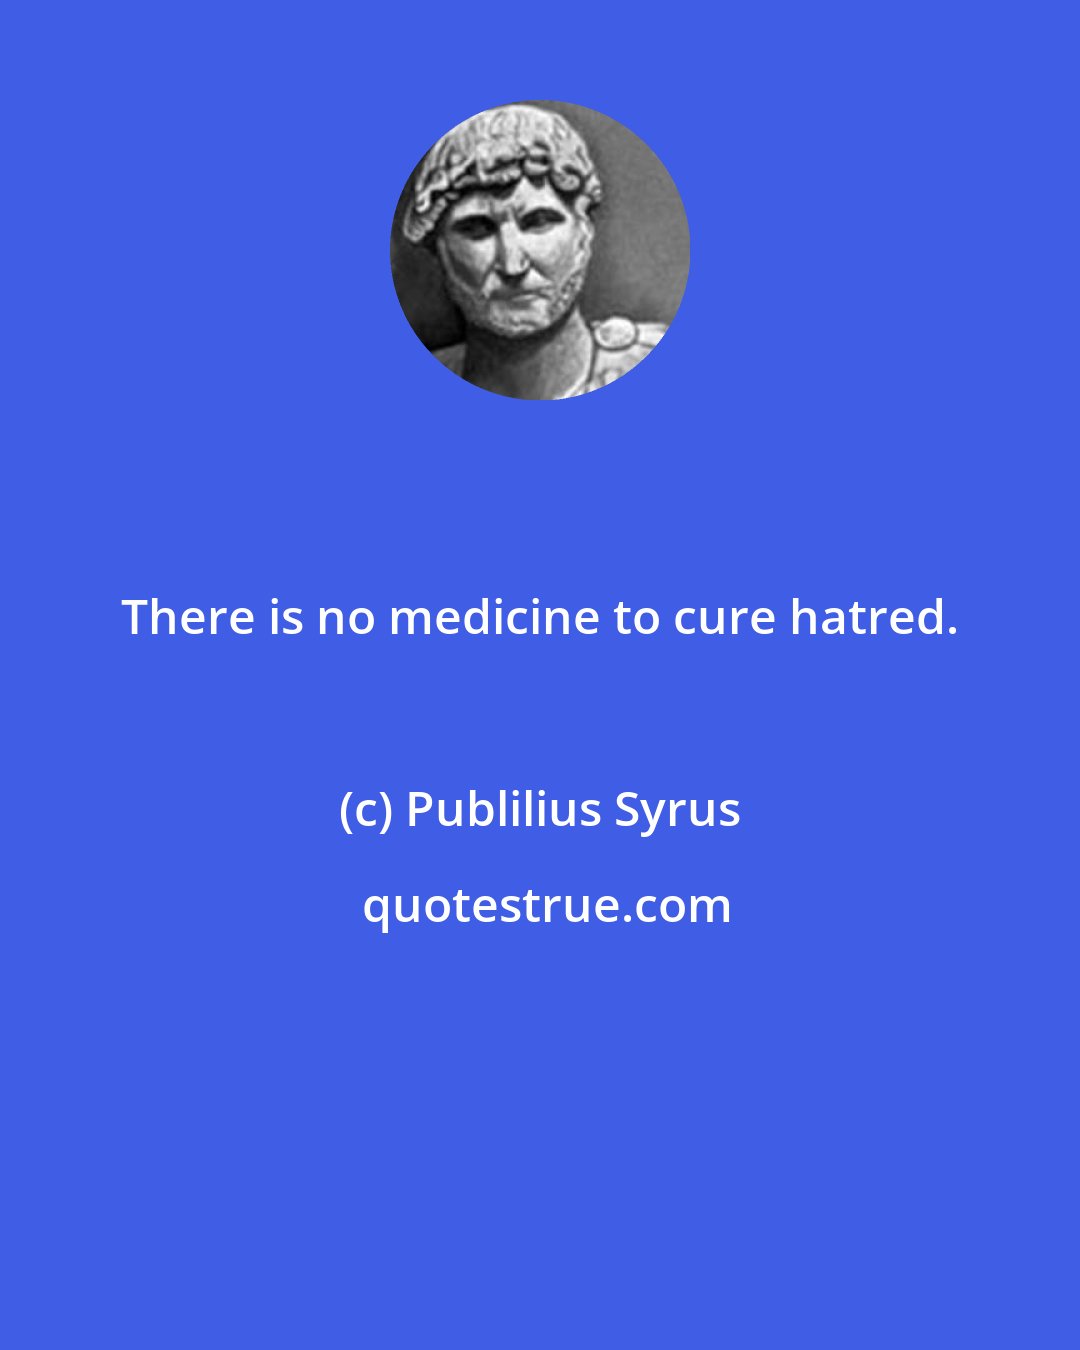 Publilius Syrus: There is no medicine to cure hatred.